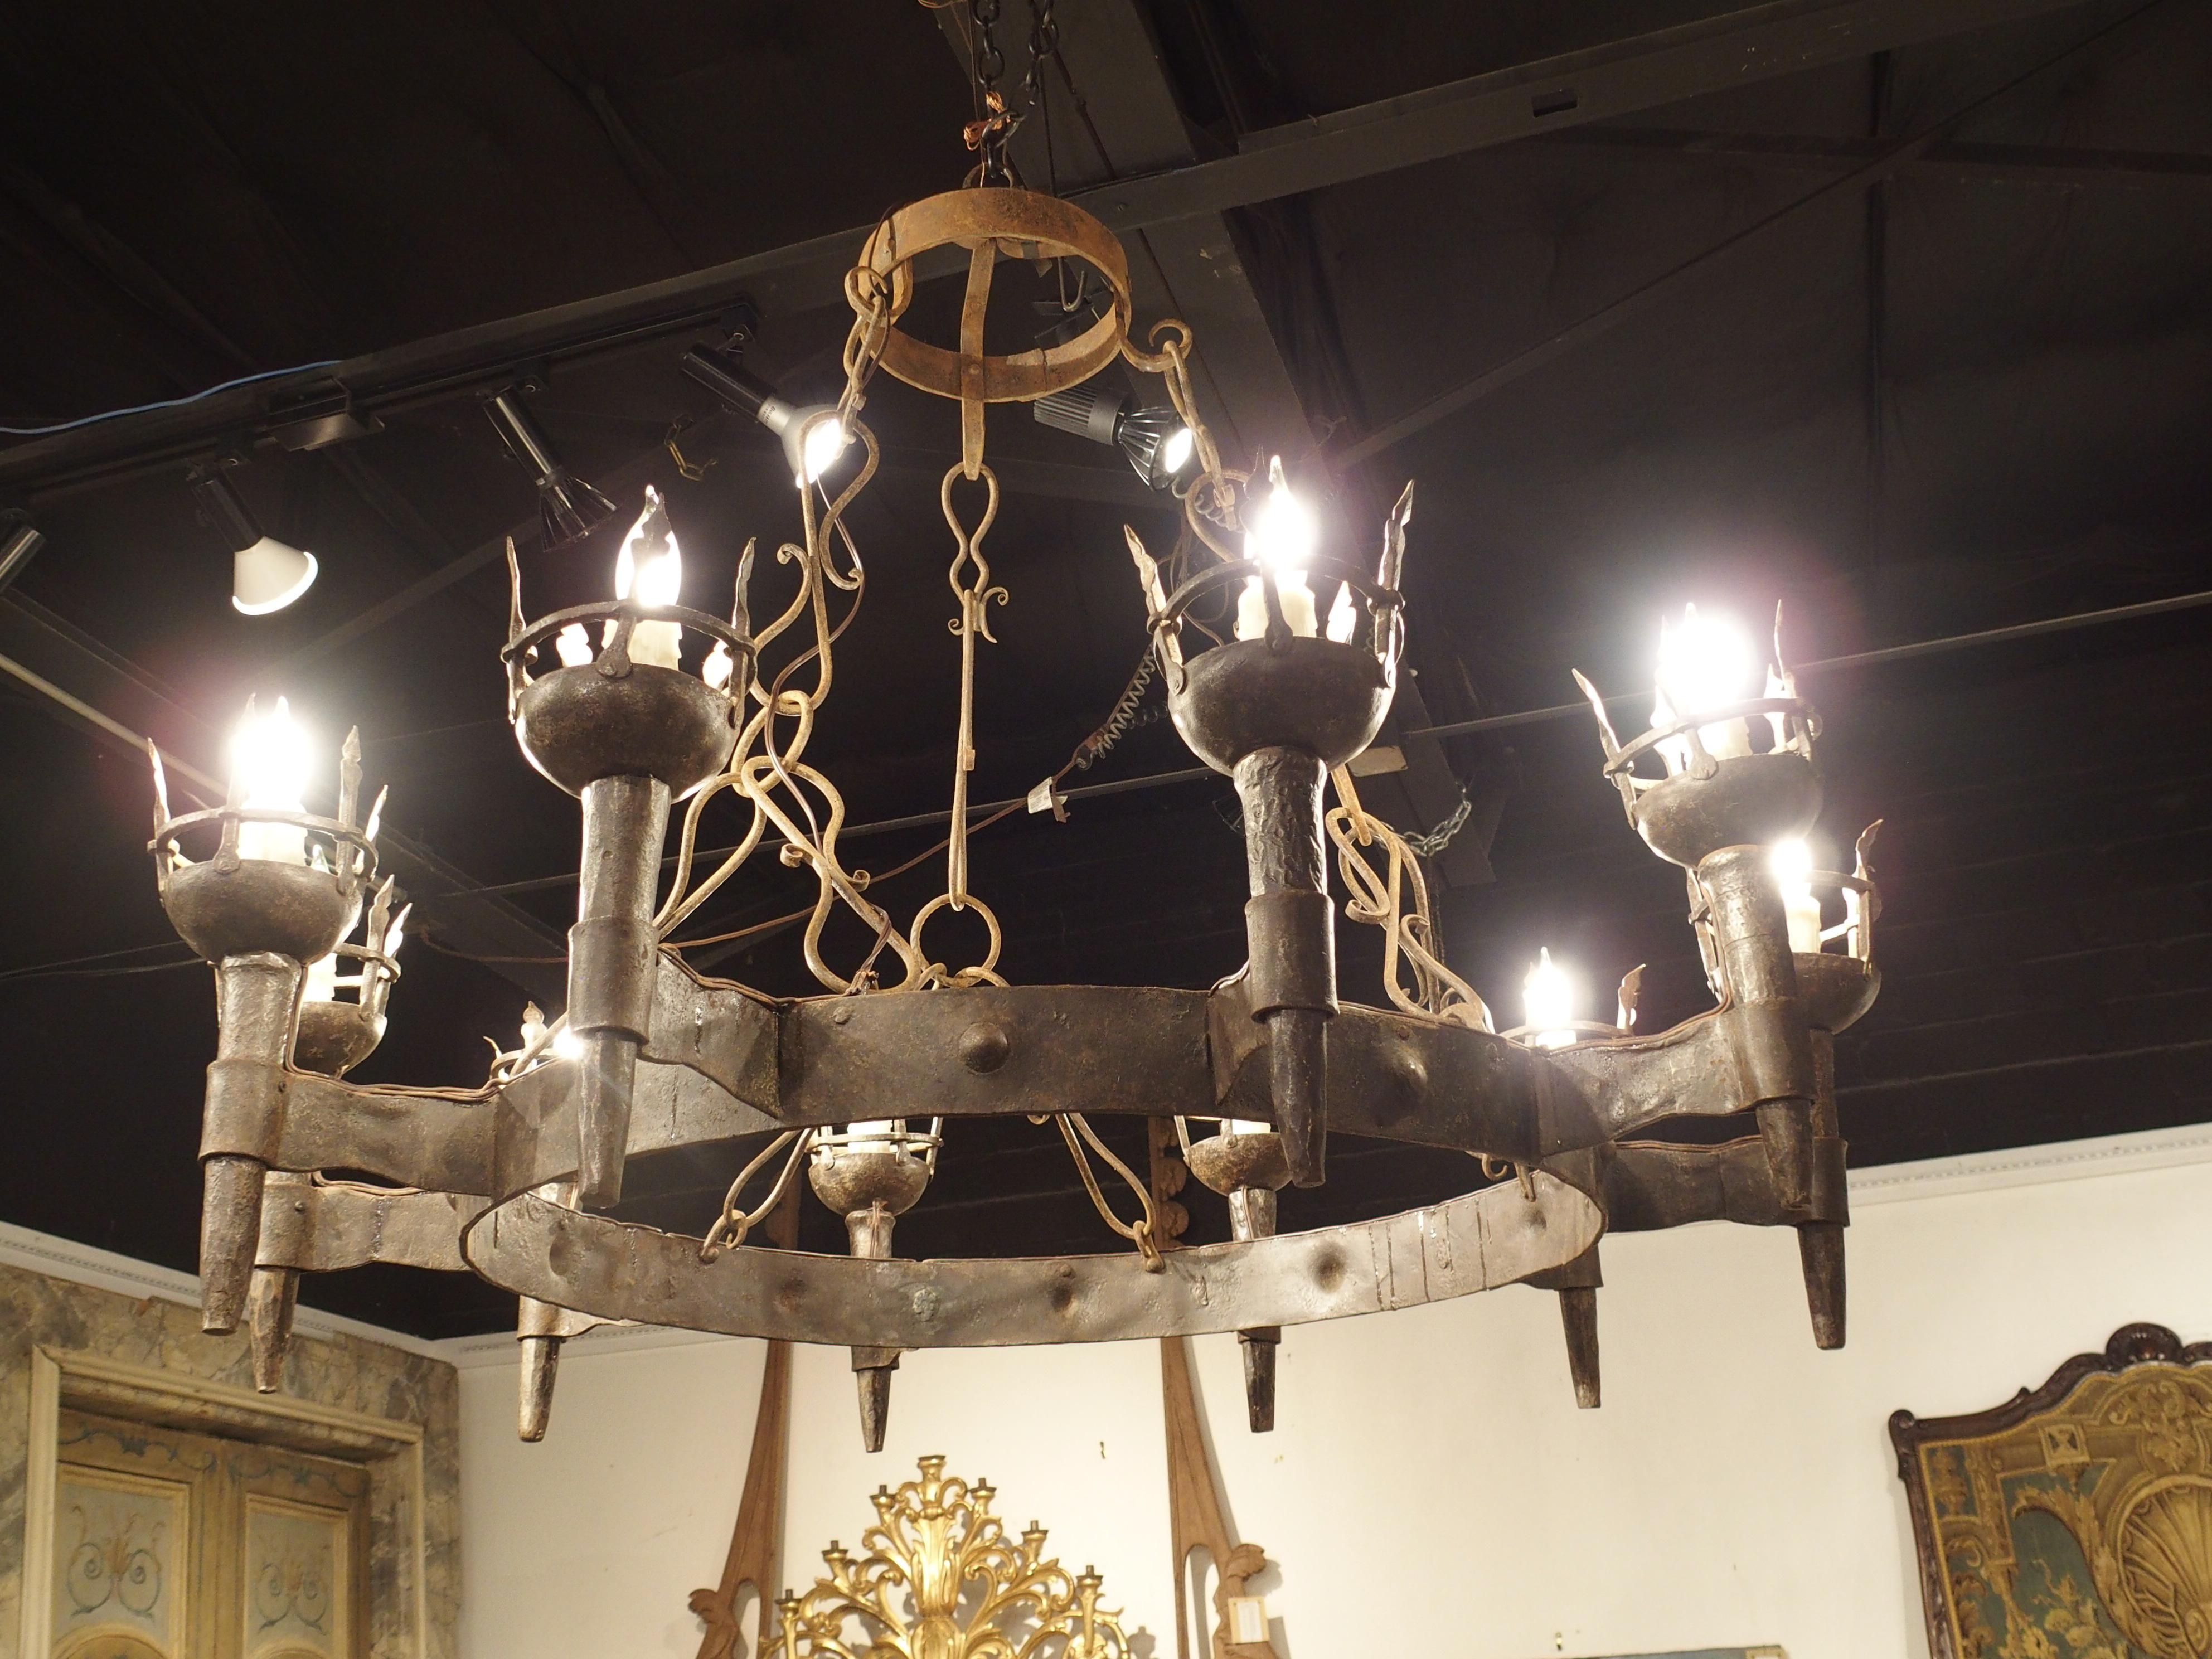 An exquisite and large light source, this hand wrought iron torch chandelier hails from the late 1800s. Crafted in France, the chandelier boasts a captivating design featuring hand-hammered roundels adorning the open ring that gracefully cradles ten